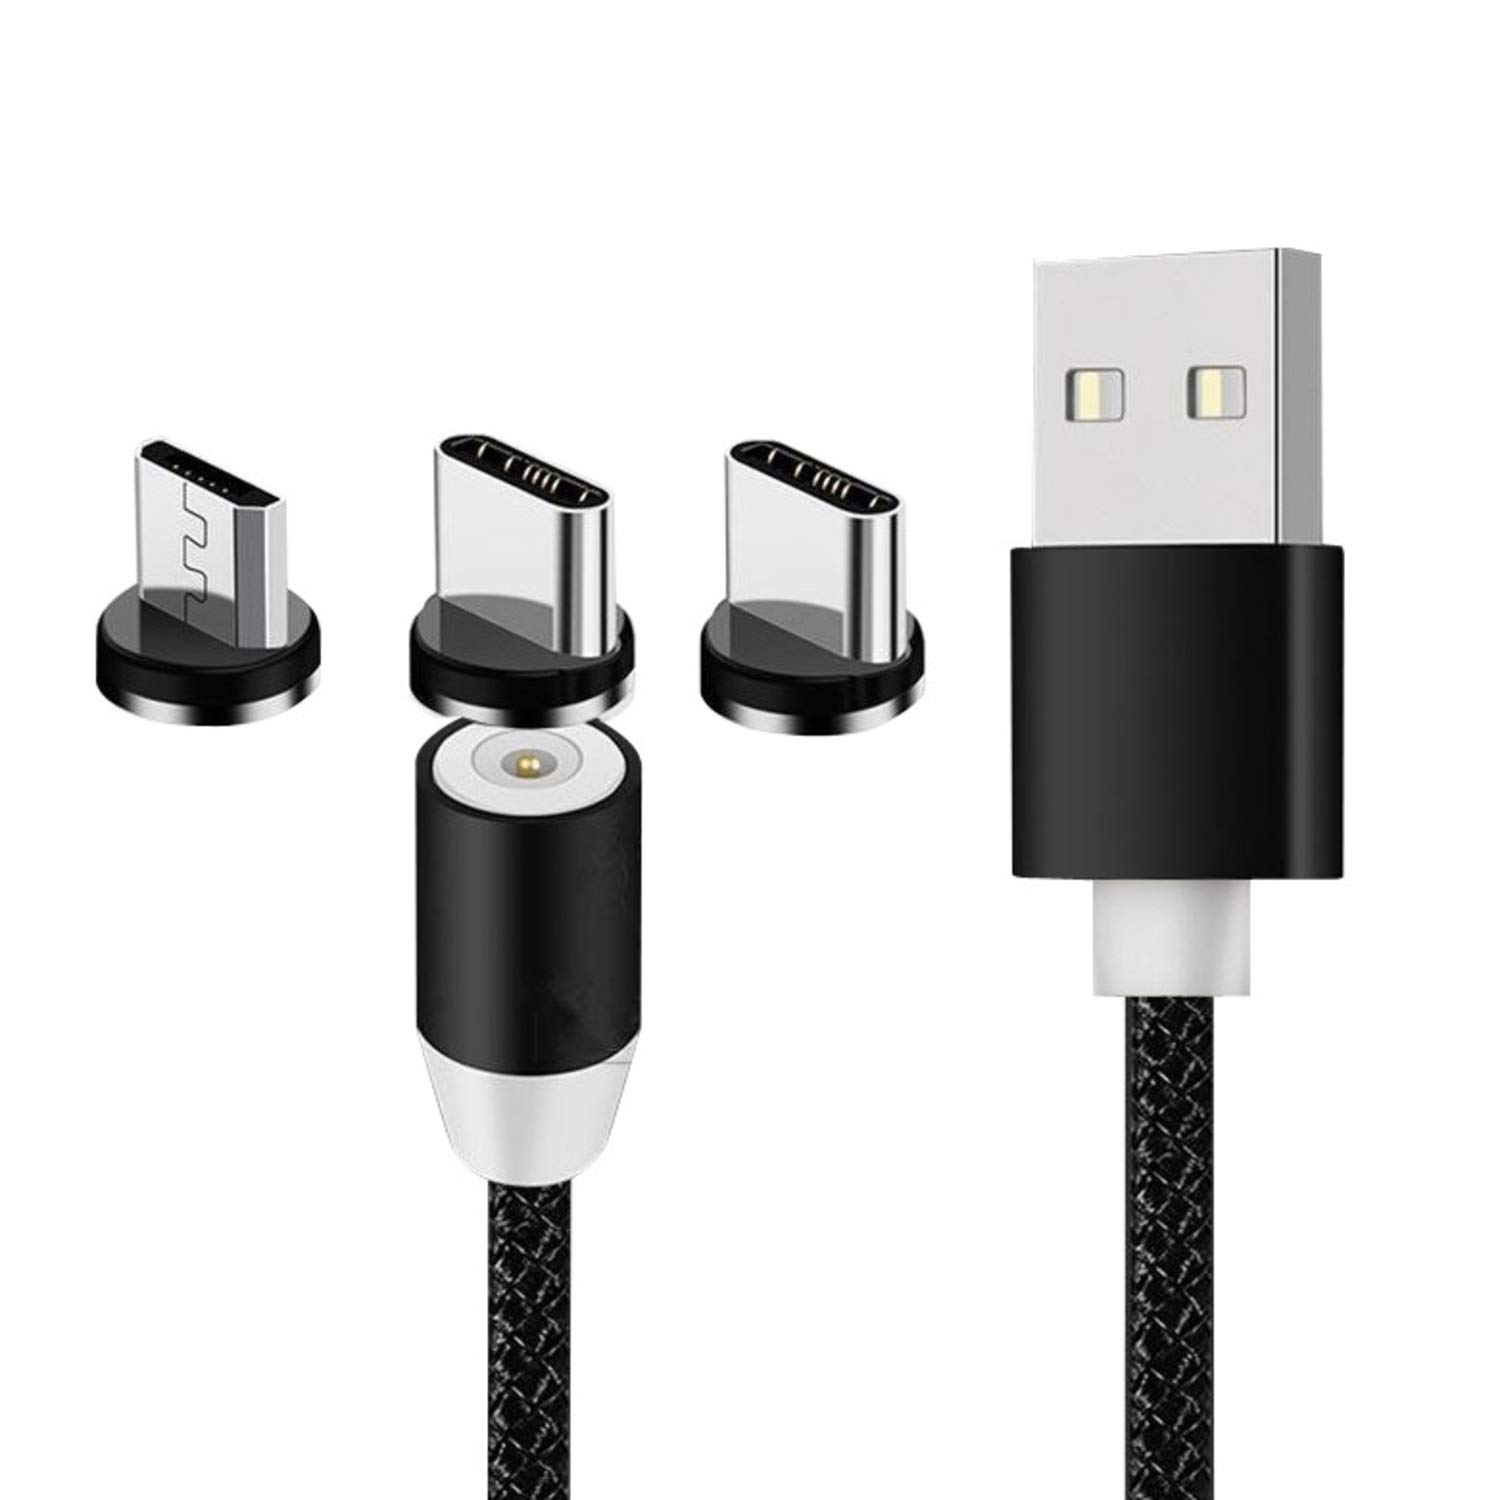 Teslaa 3-in-1 Magnetic Charging Cable, Fast Charging Micro USB, Type-C, 8 Pin Plug Magnet USB Cable with LED Indicator Light Nylon Braided Durable 1Meter Cable for All Smartphone. (Black)